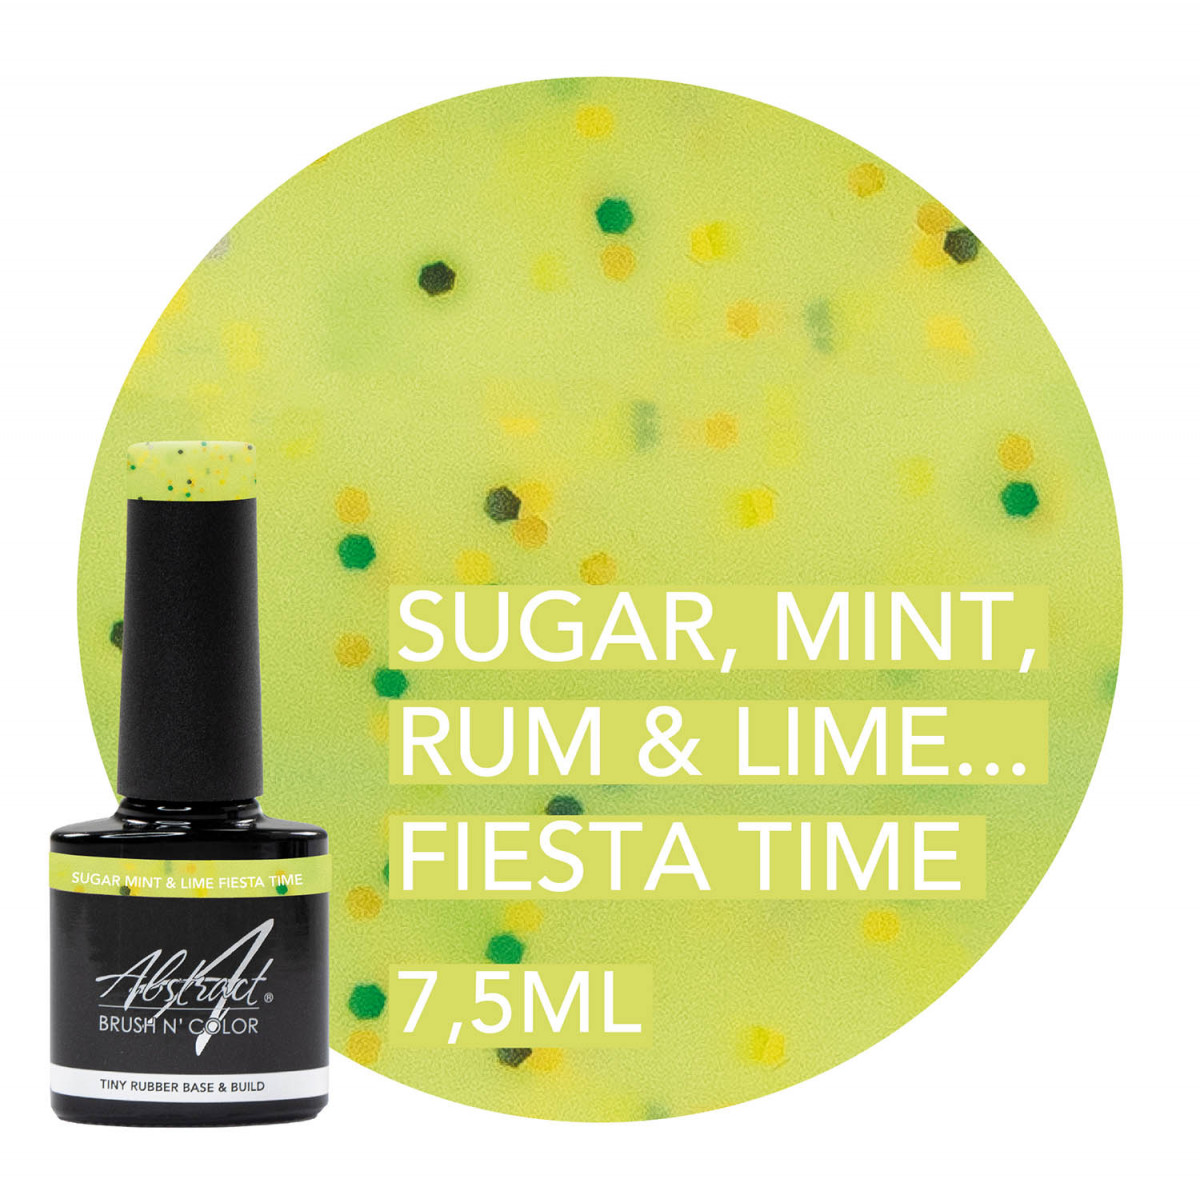 PRE-ORDER Sugar Mint Rum and Lime Fiesta Time - TINY Rubber Base & Build Gel Abstract